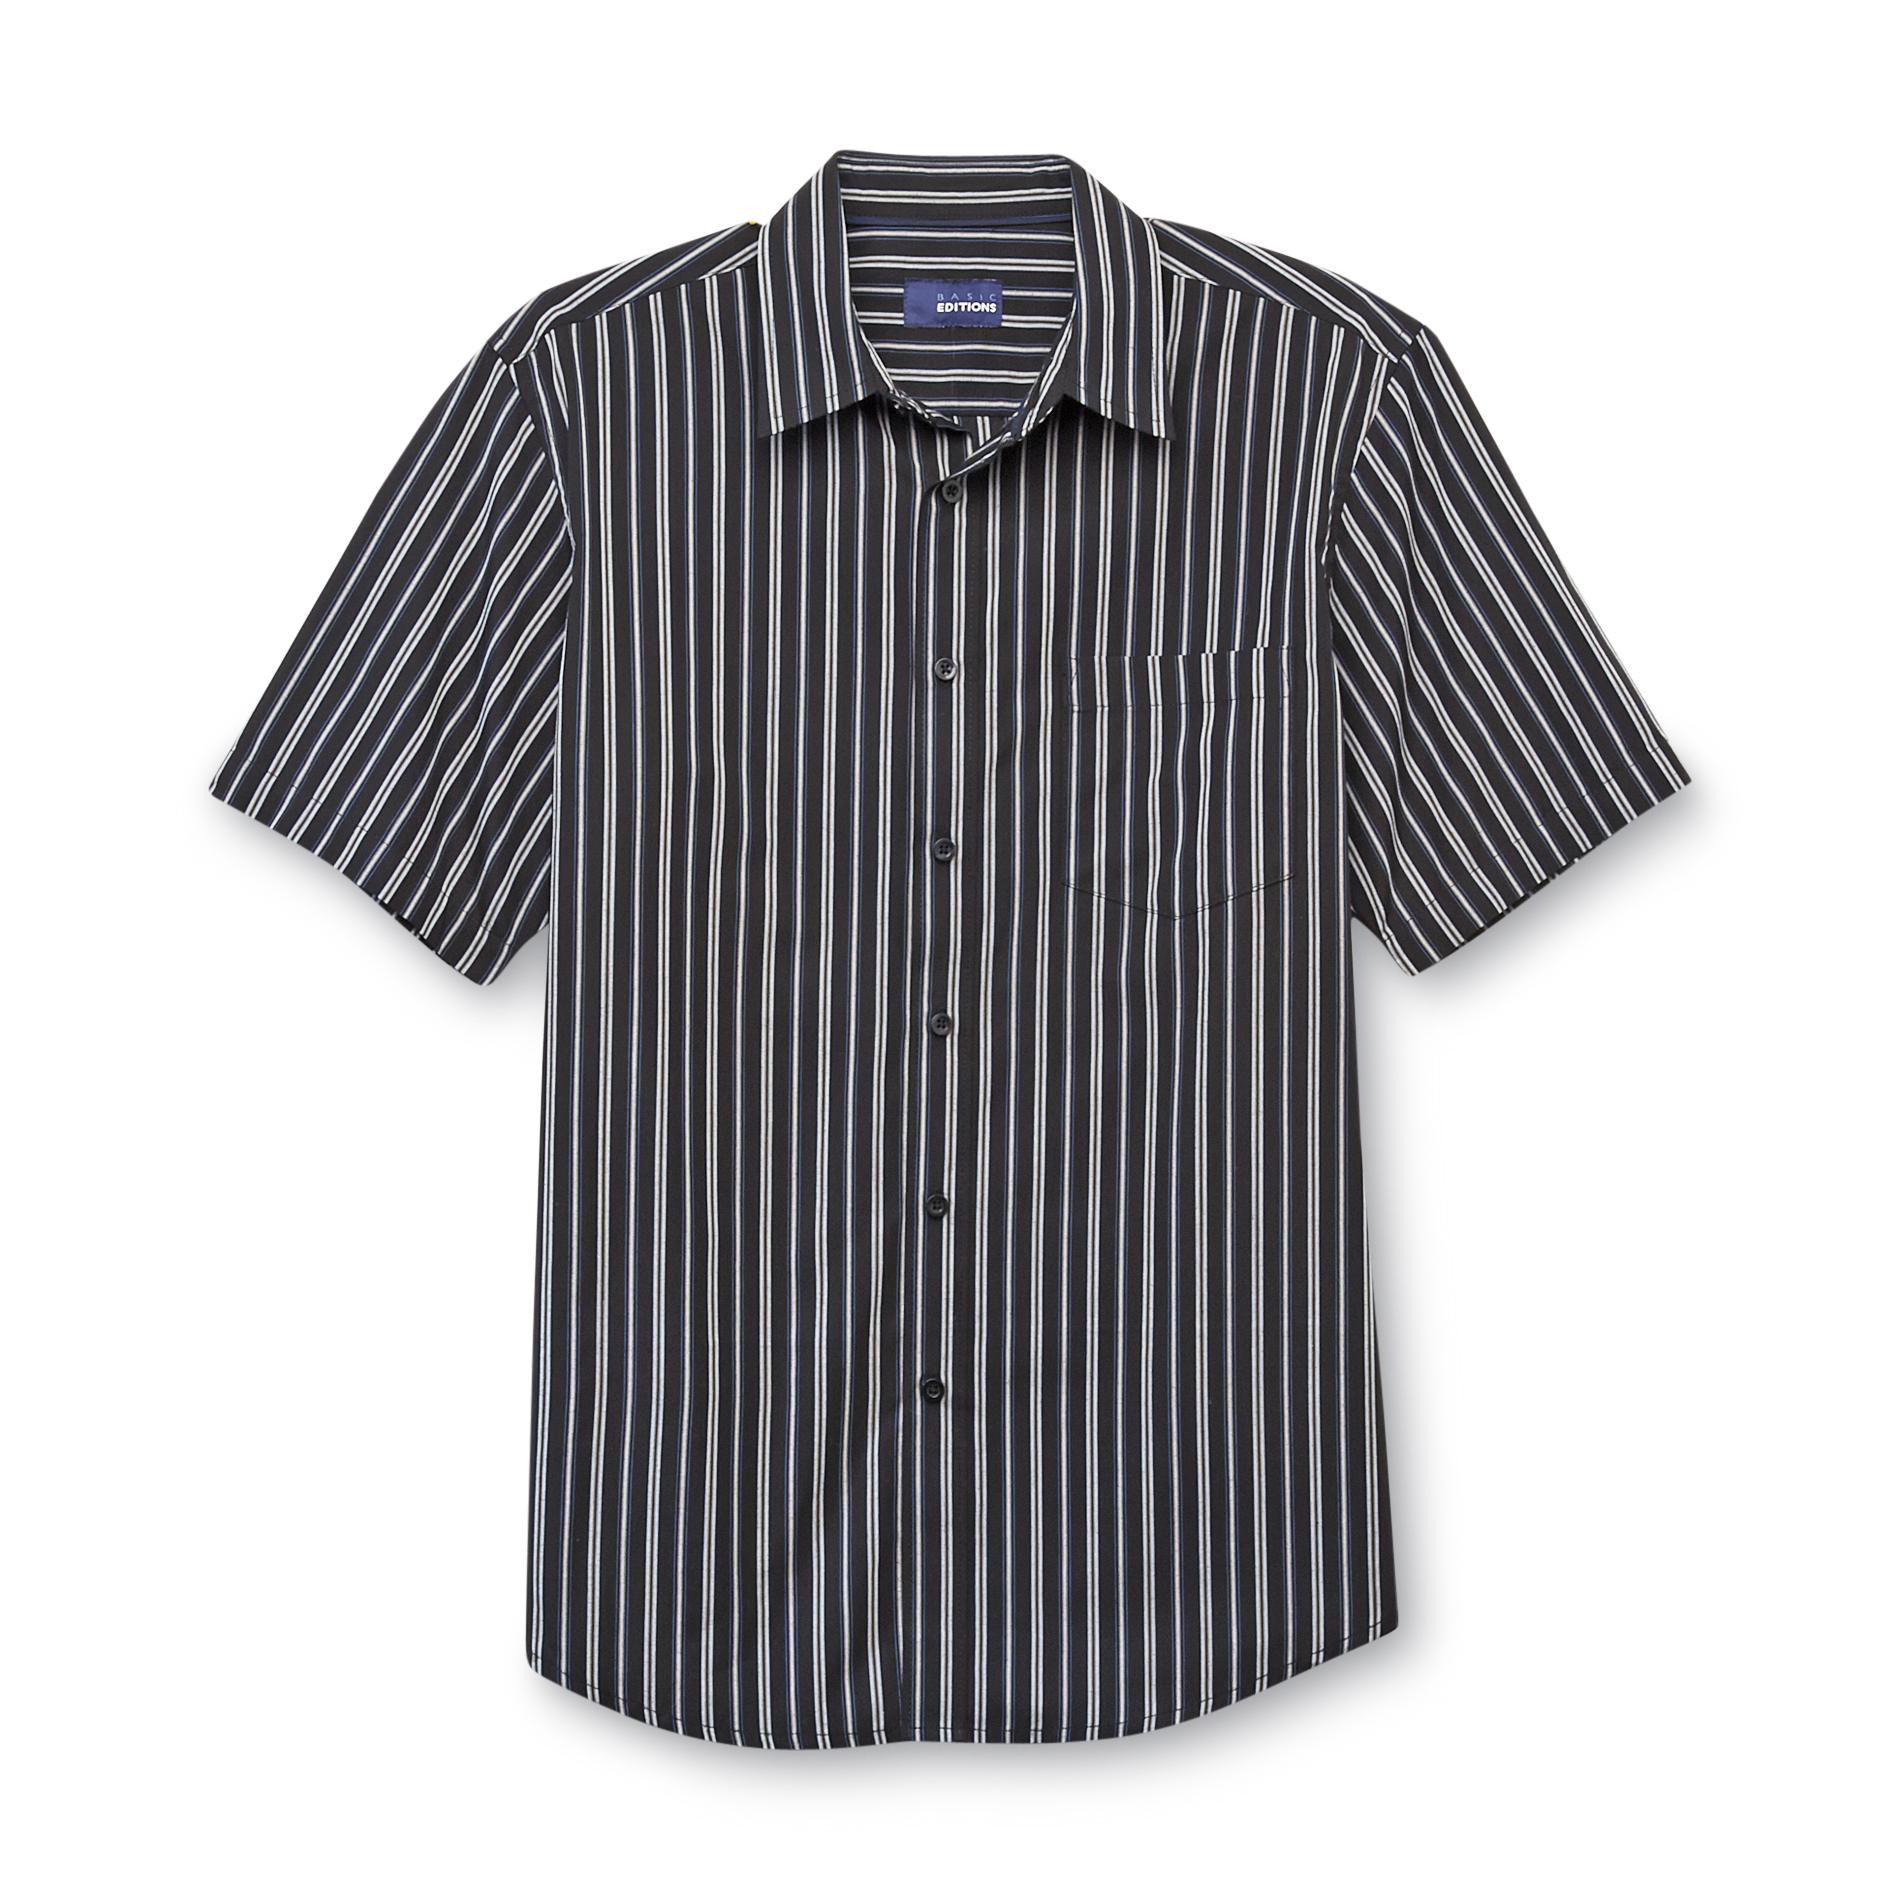 Basic Editions Men's Easy Care Woven Shirt - Striped